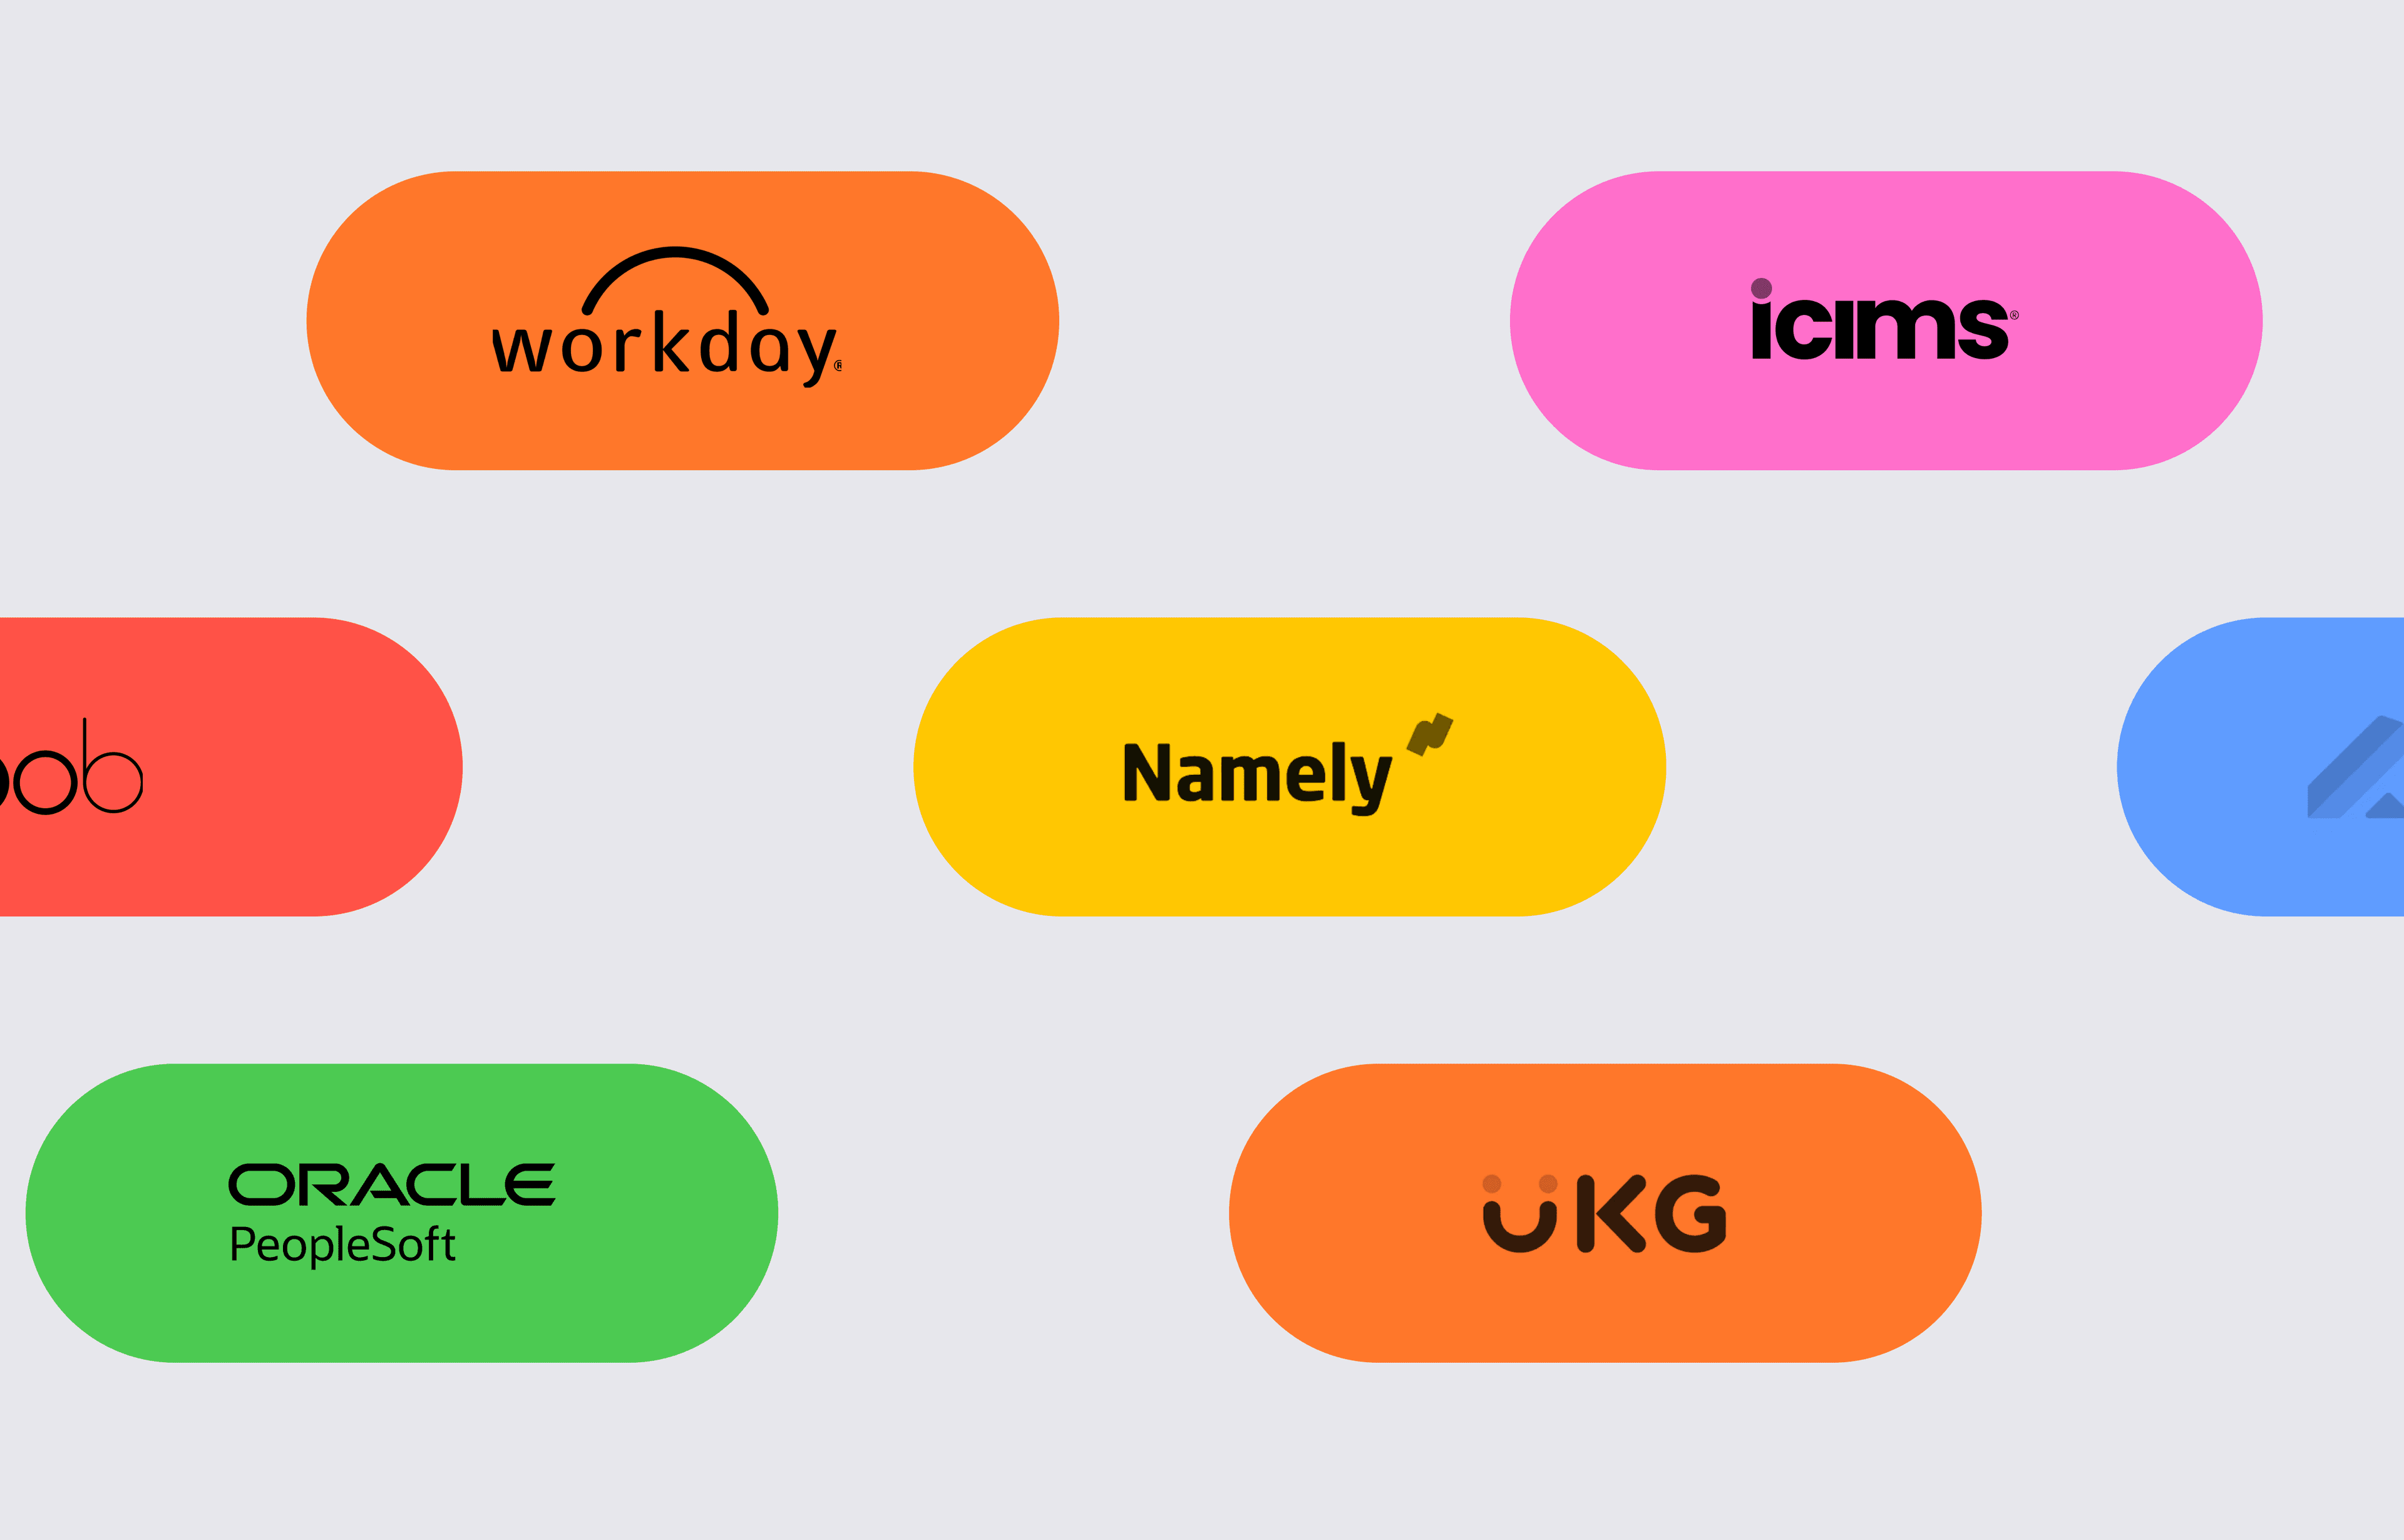 Colorful bubbles with logos for Workday, iCIMS, HiBob, Namely, Oracle PeopleSoft, and UKG.